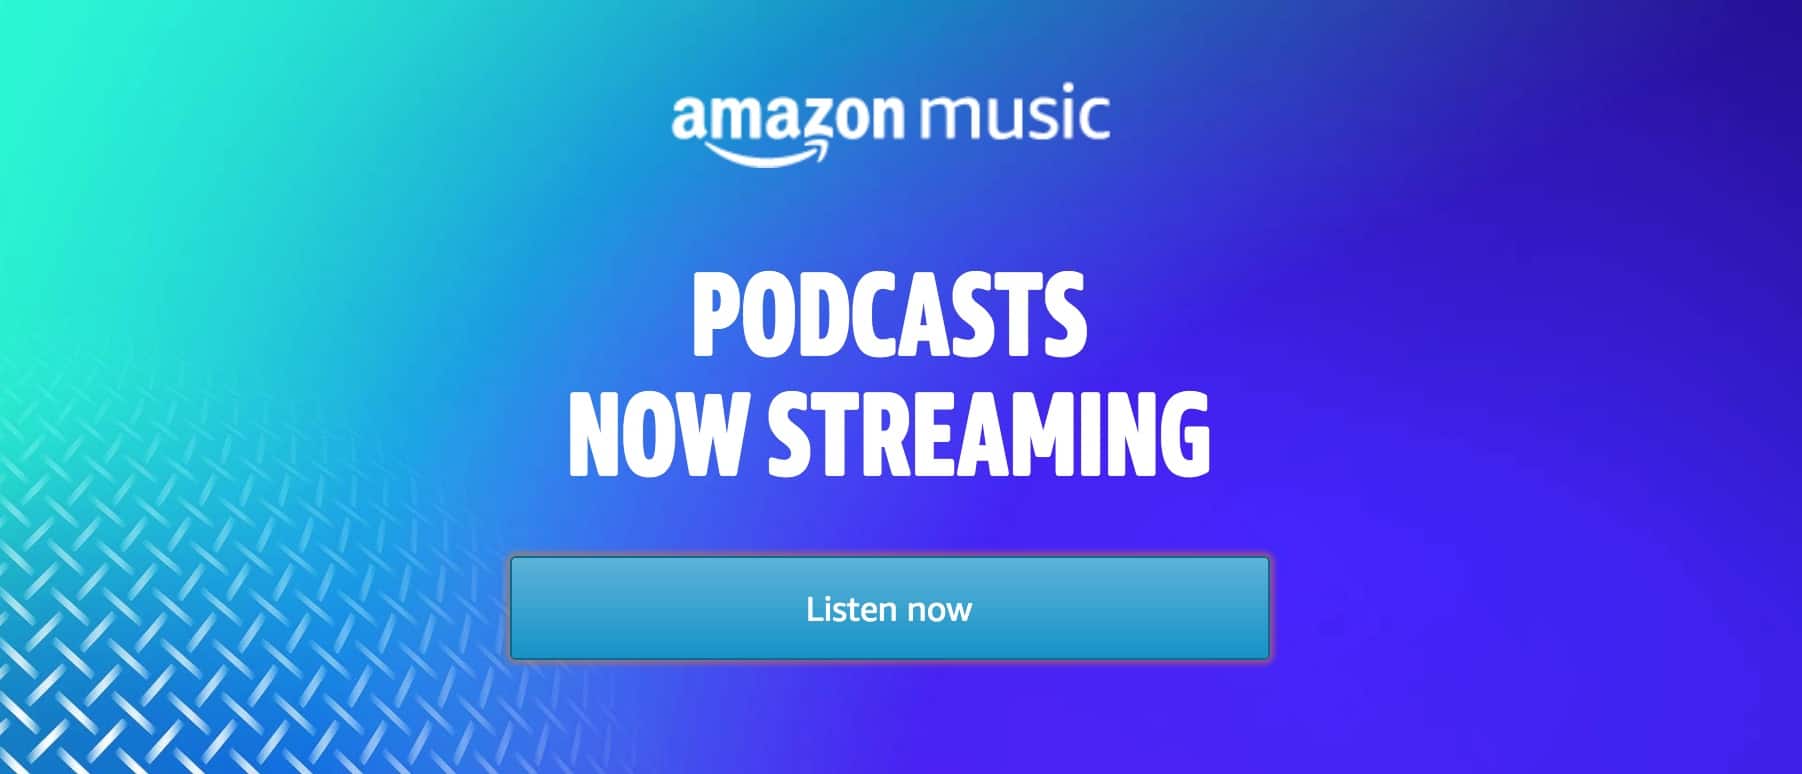 amazon podcasts - Radio Clash Podcast ‘Alexa play Radio Clash Music Podcast' Radio Clash Music Mashup Podcast brings you the best in eclectic tunes, mashups and remixes from around the world. Since 2004, we've been bringing you the freshest and most innovative music from a diverse range of genres and cultures. Join us on our musical journey as we explore the sounds of yesterday, today, and tomorrow. Discover new music and be inspired by the mashup of musical styles that only Radio Clash can provide. Subscribe now to elevate your musical experience!